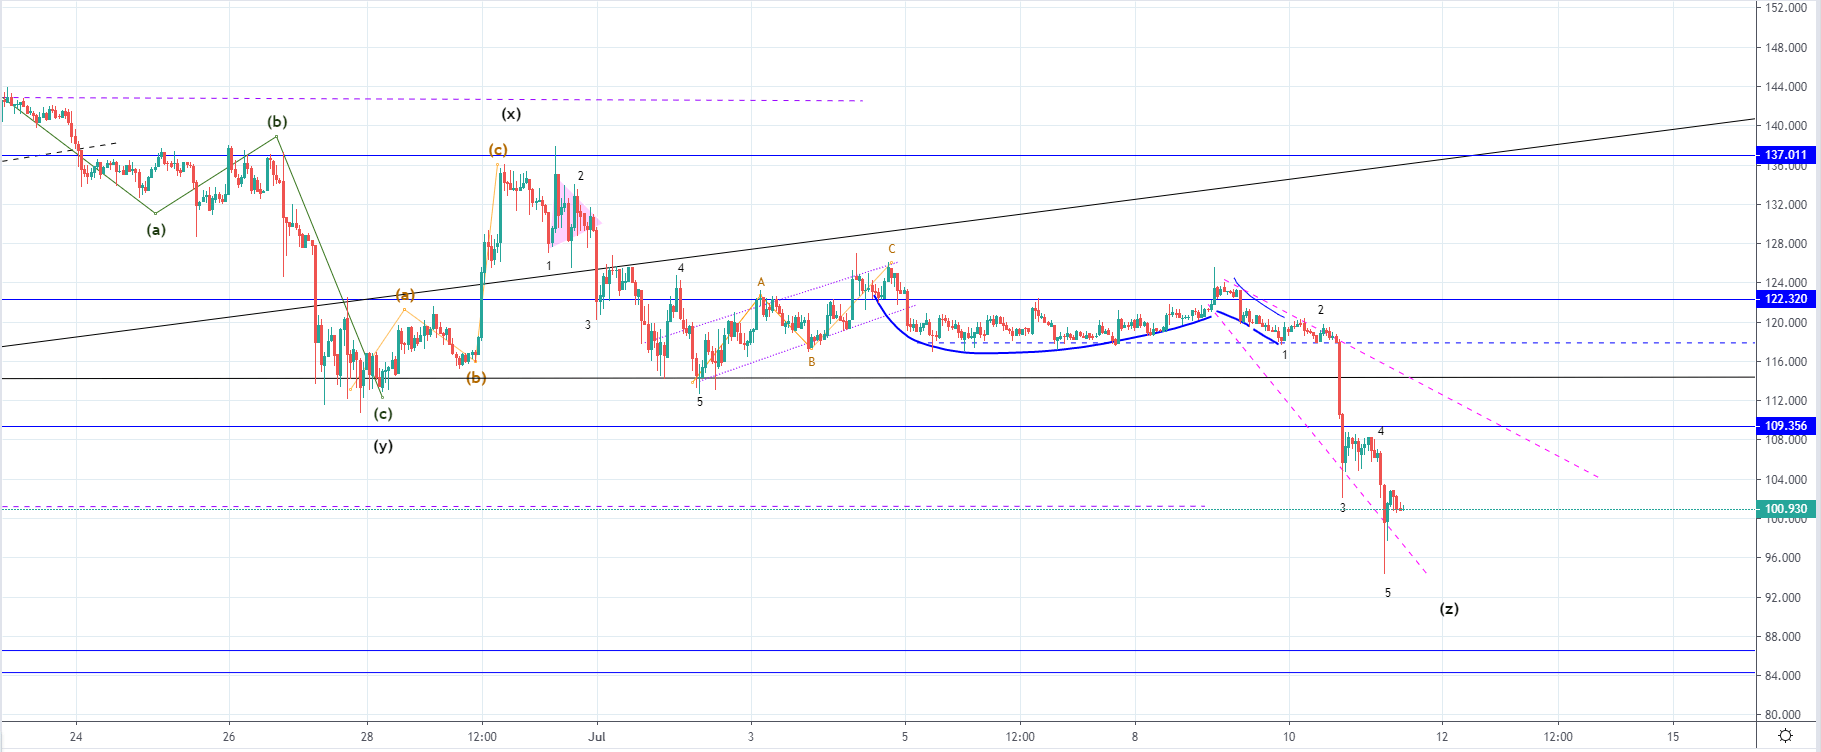 LTC/USD and EOS/USD: the prices crash as the corrective increase ended